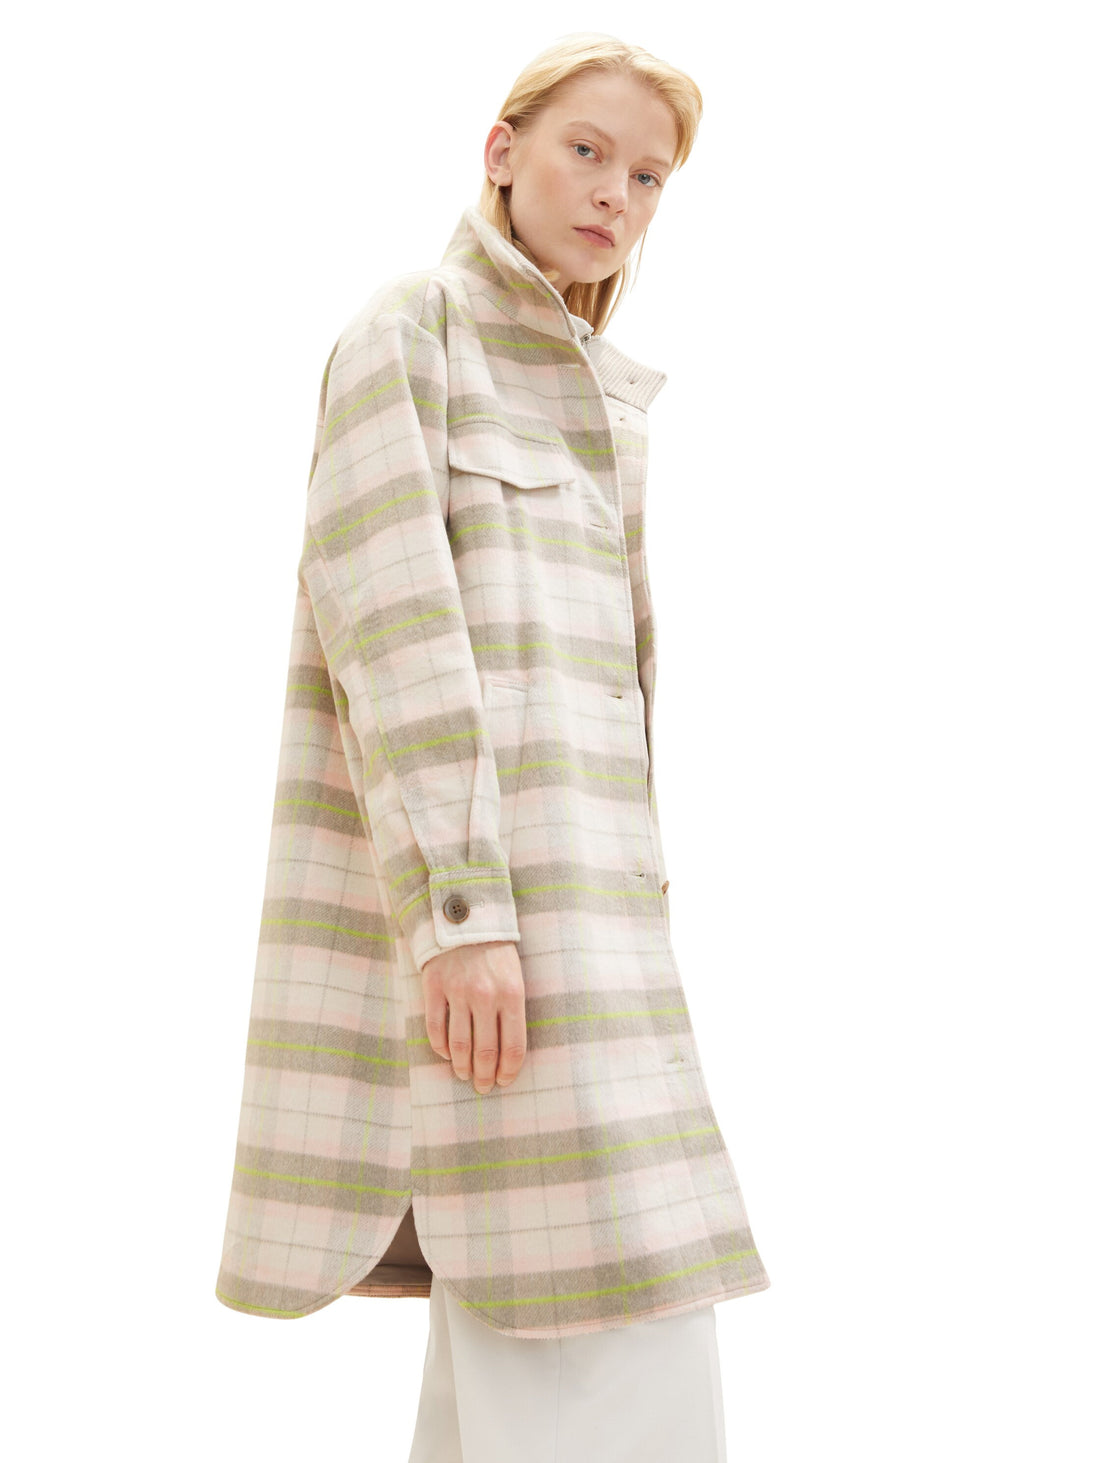 Checkered Coat With High Collar_1038686_32535_03